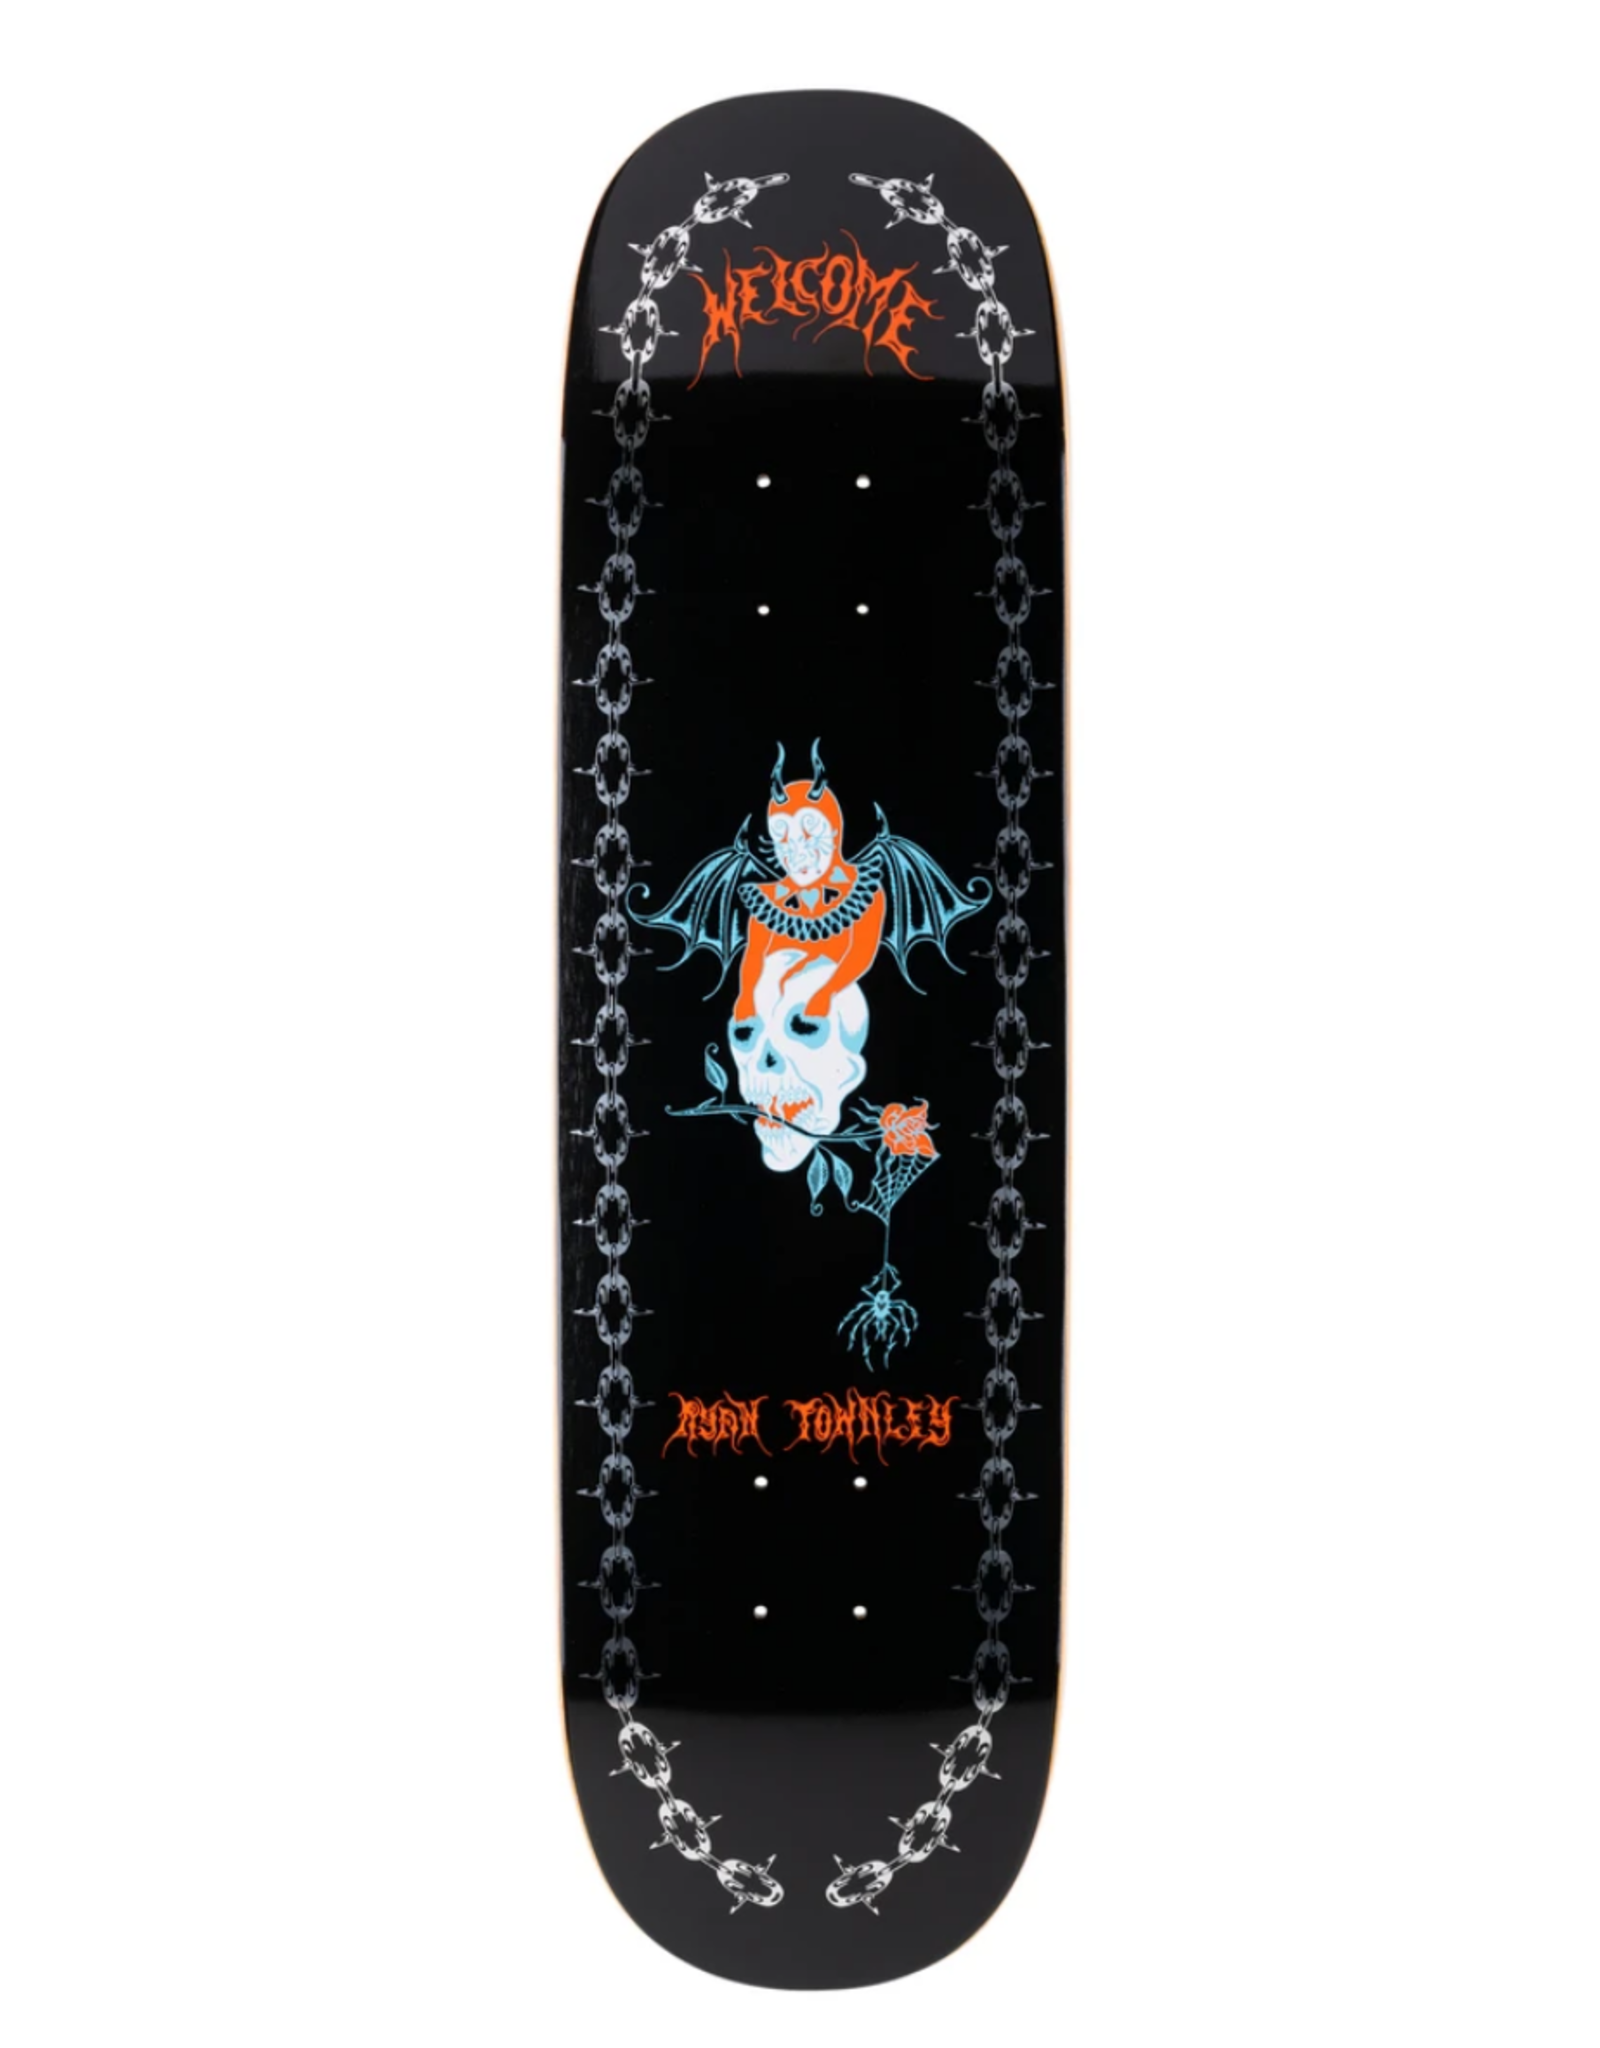 Welcome Welcome - ANGEL on Enenra (Black) DECK - 8.5"